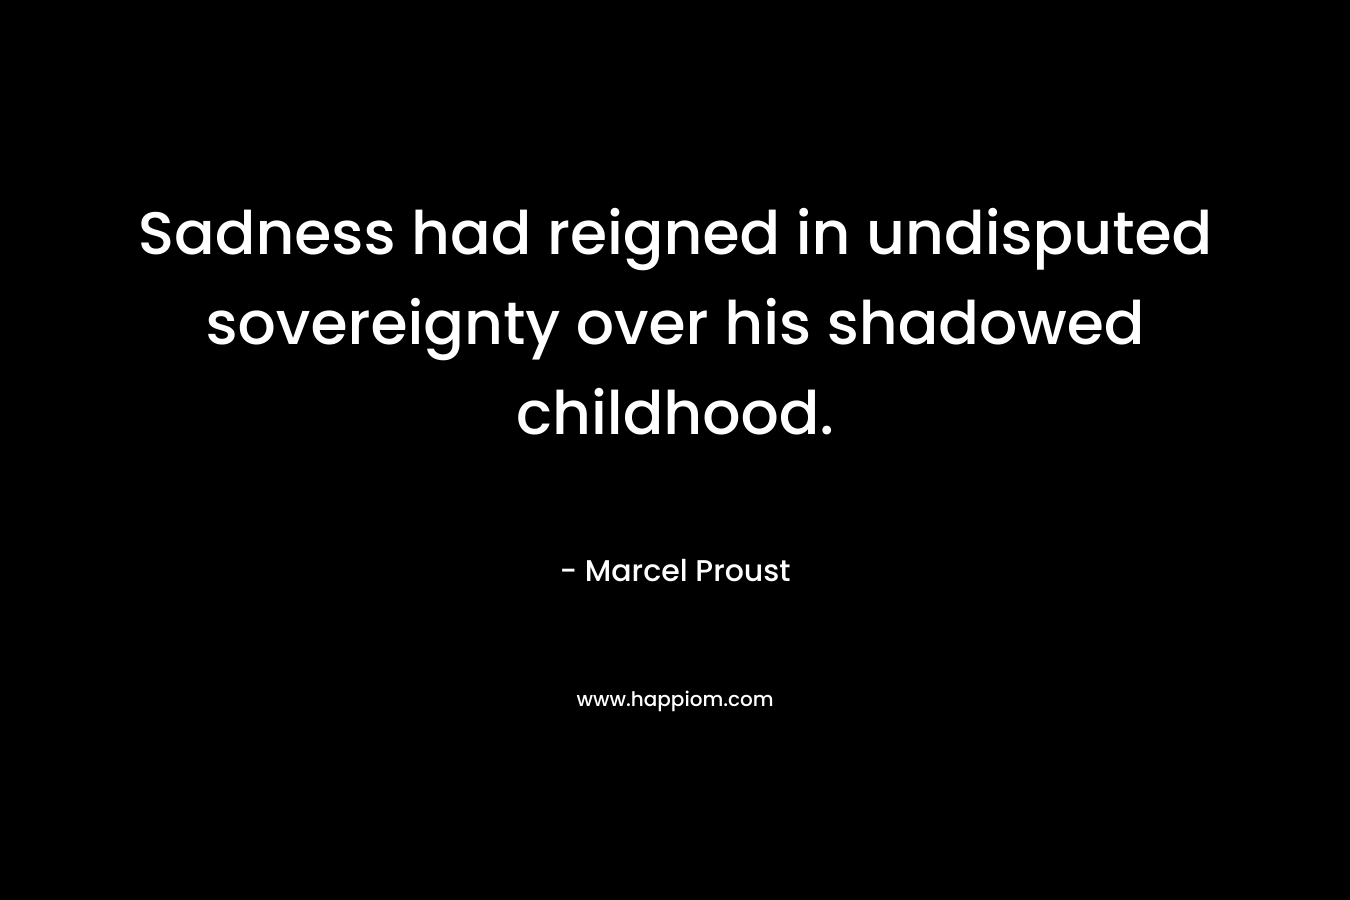 Sadness had reigned in undisputed sovereignty over his shadowed childhood.